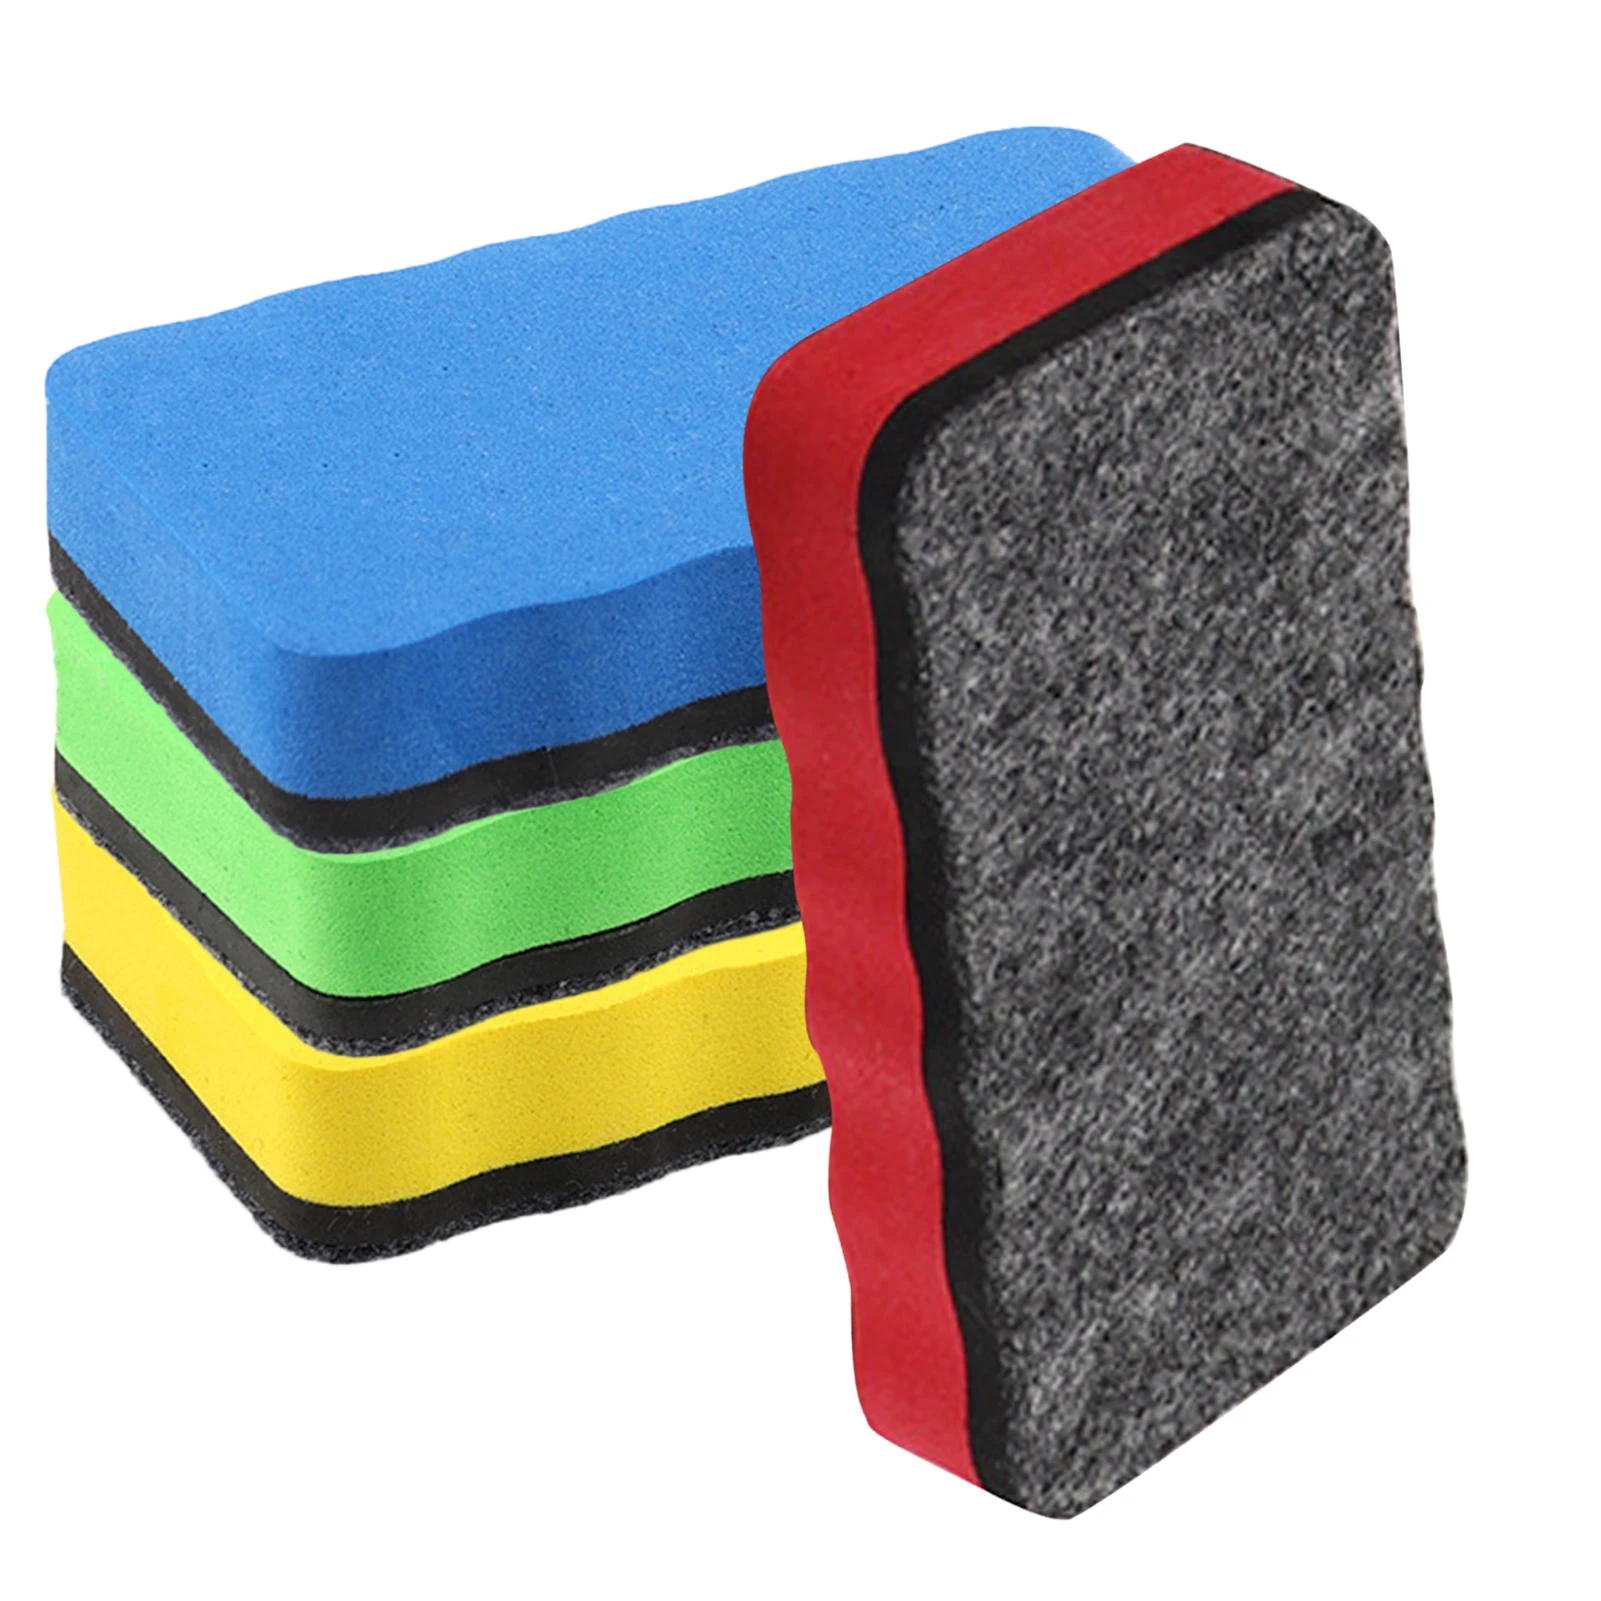 

4pcs Home Practical Adults Kids Magnetic Pad Teaching Dry Wipe Whiteboard Eraser Without Trace Thick Felt School Office Colorful